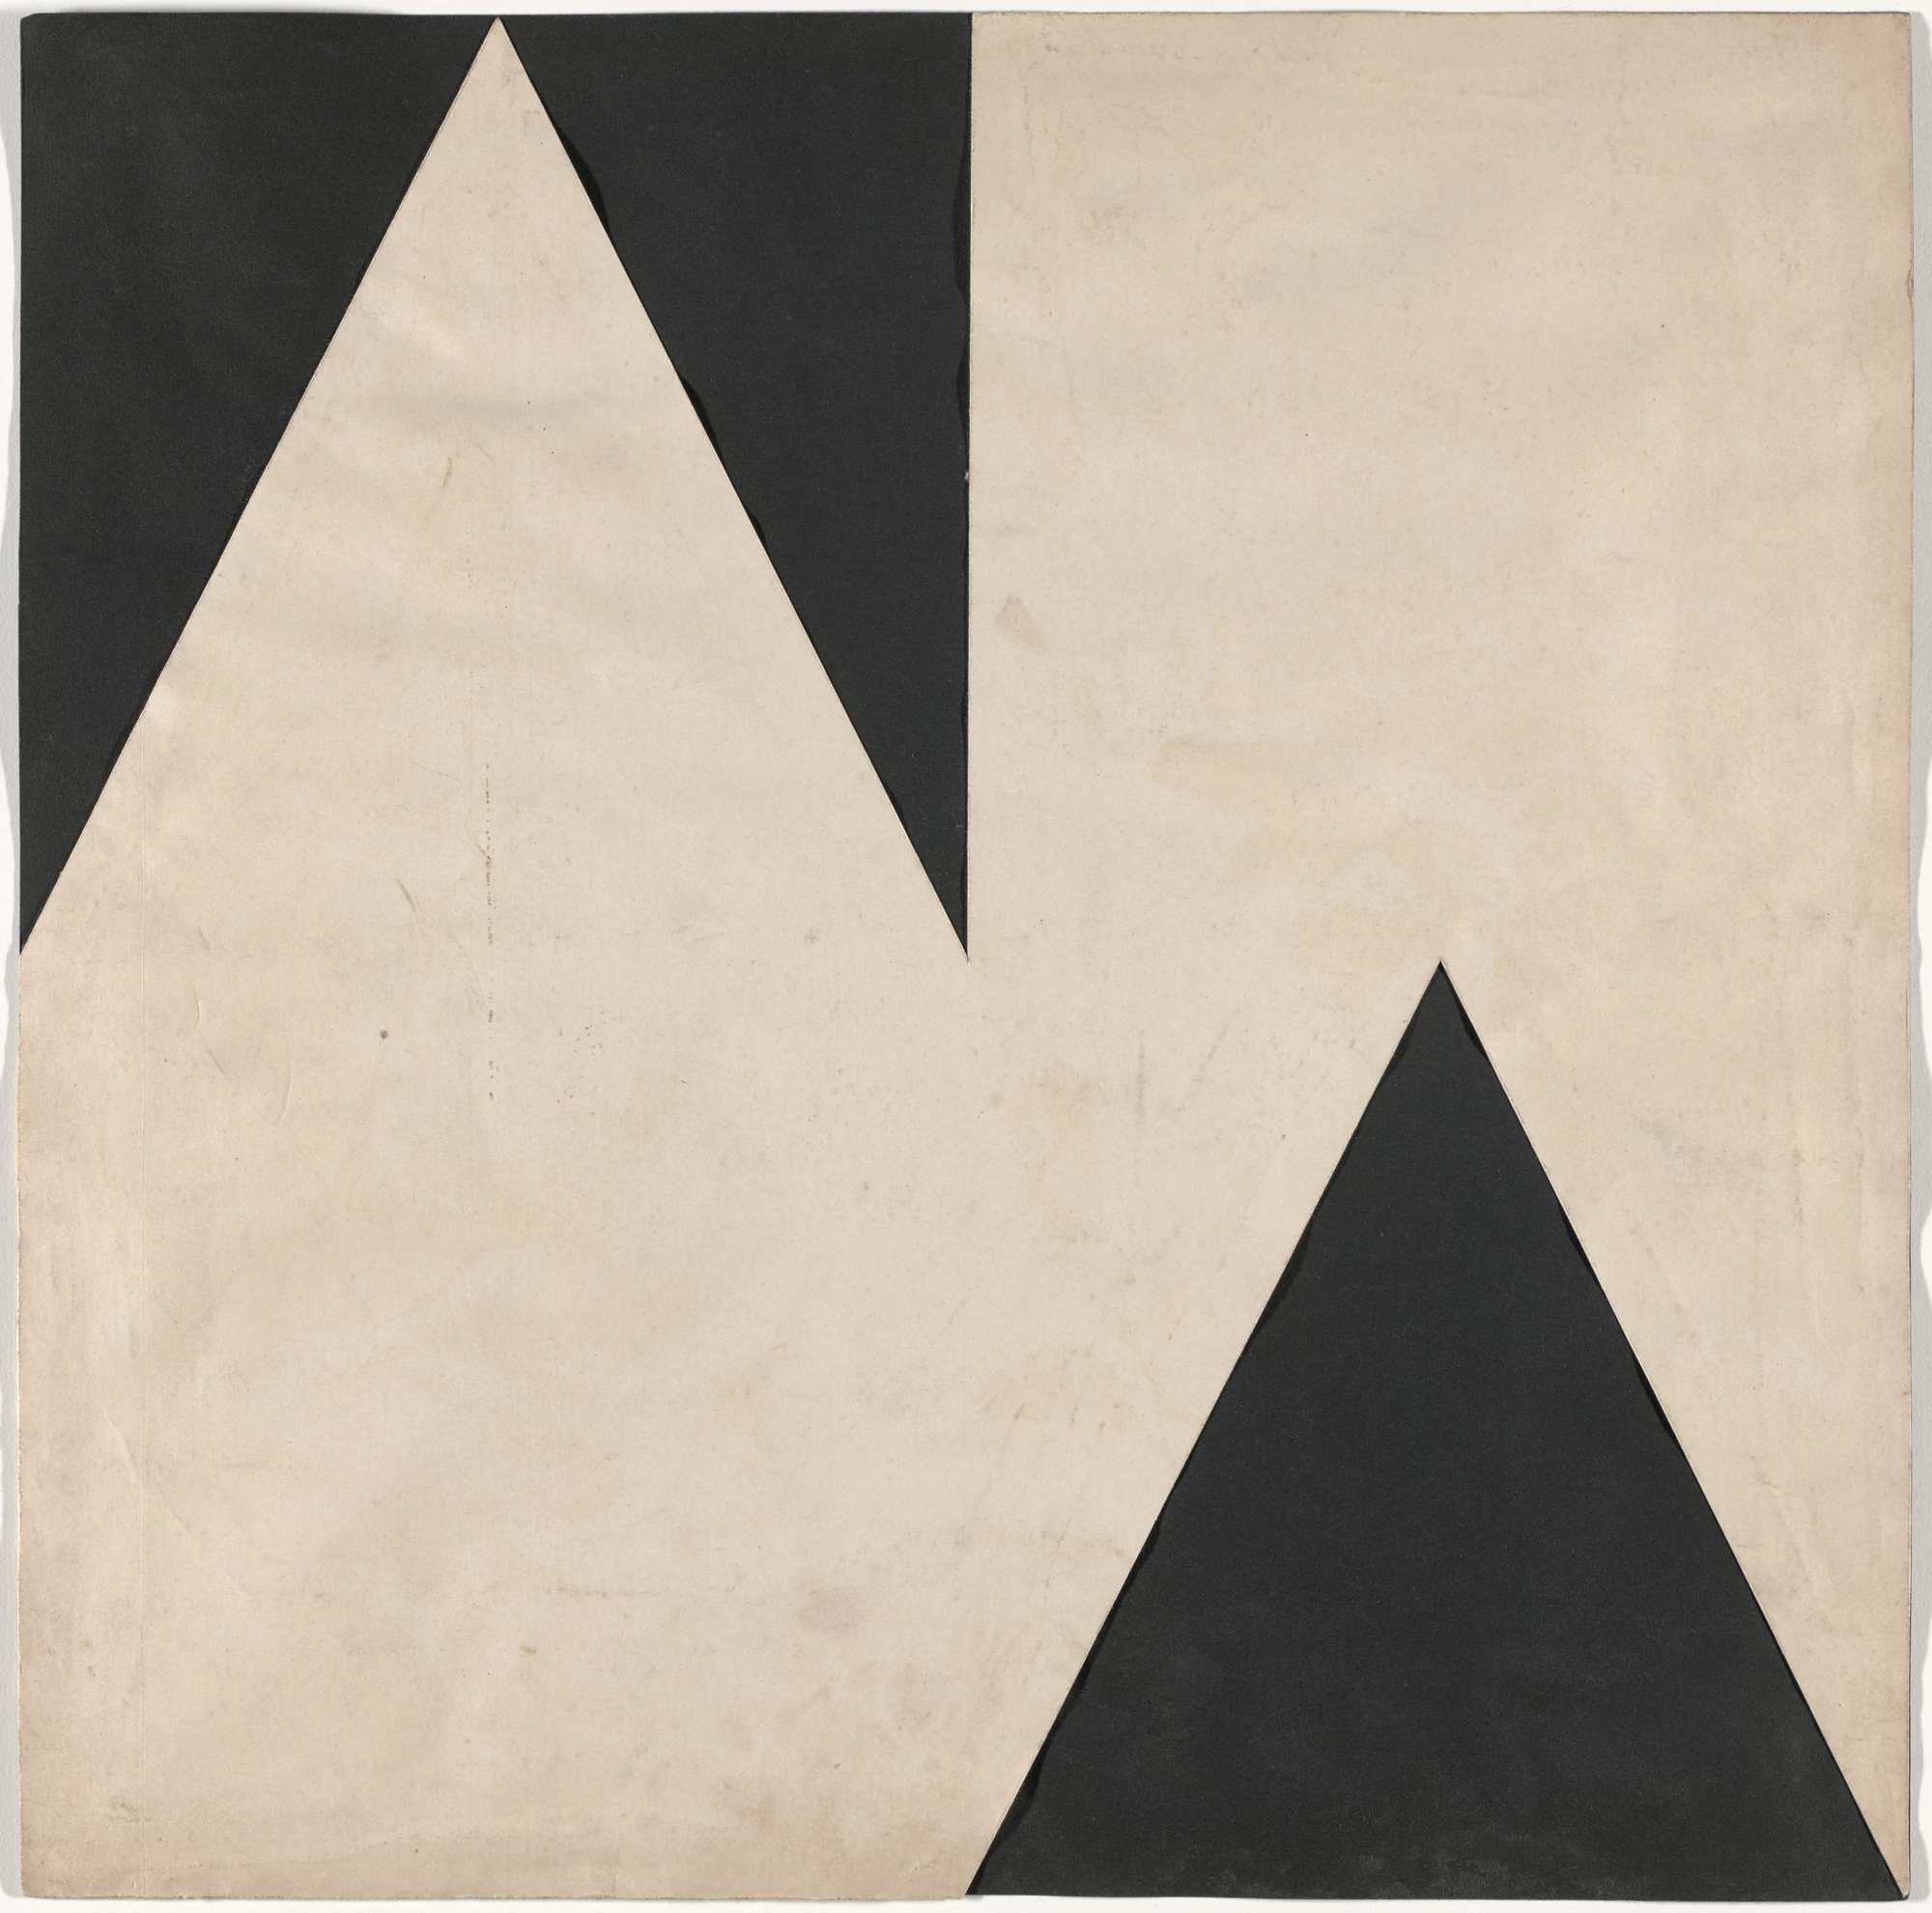 Study for Planes in Modulated Surface, Lygia Clark